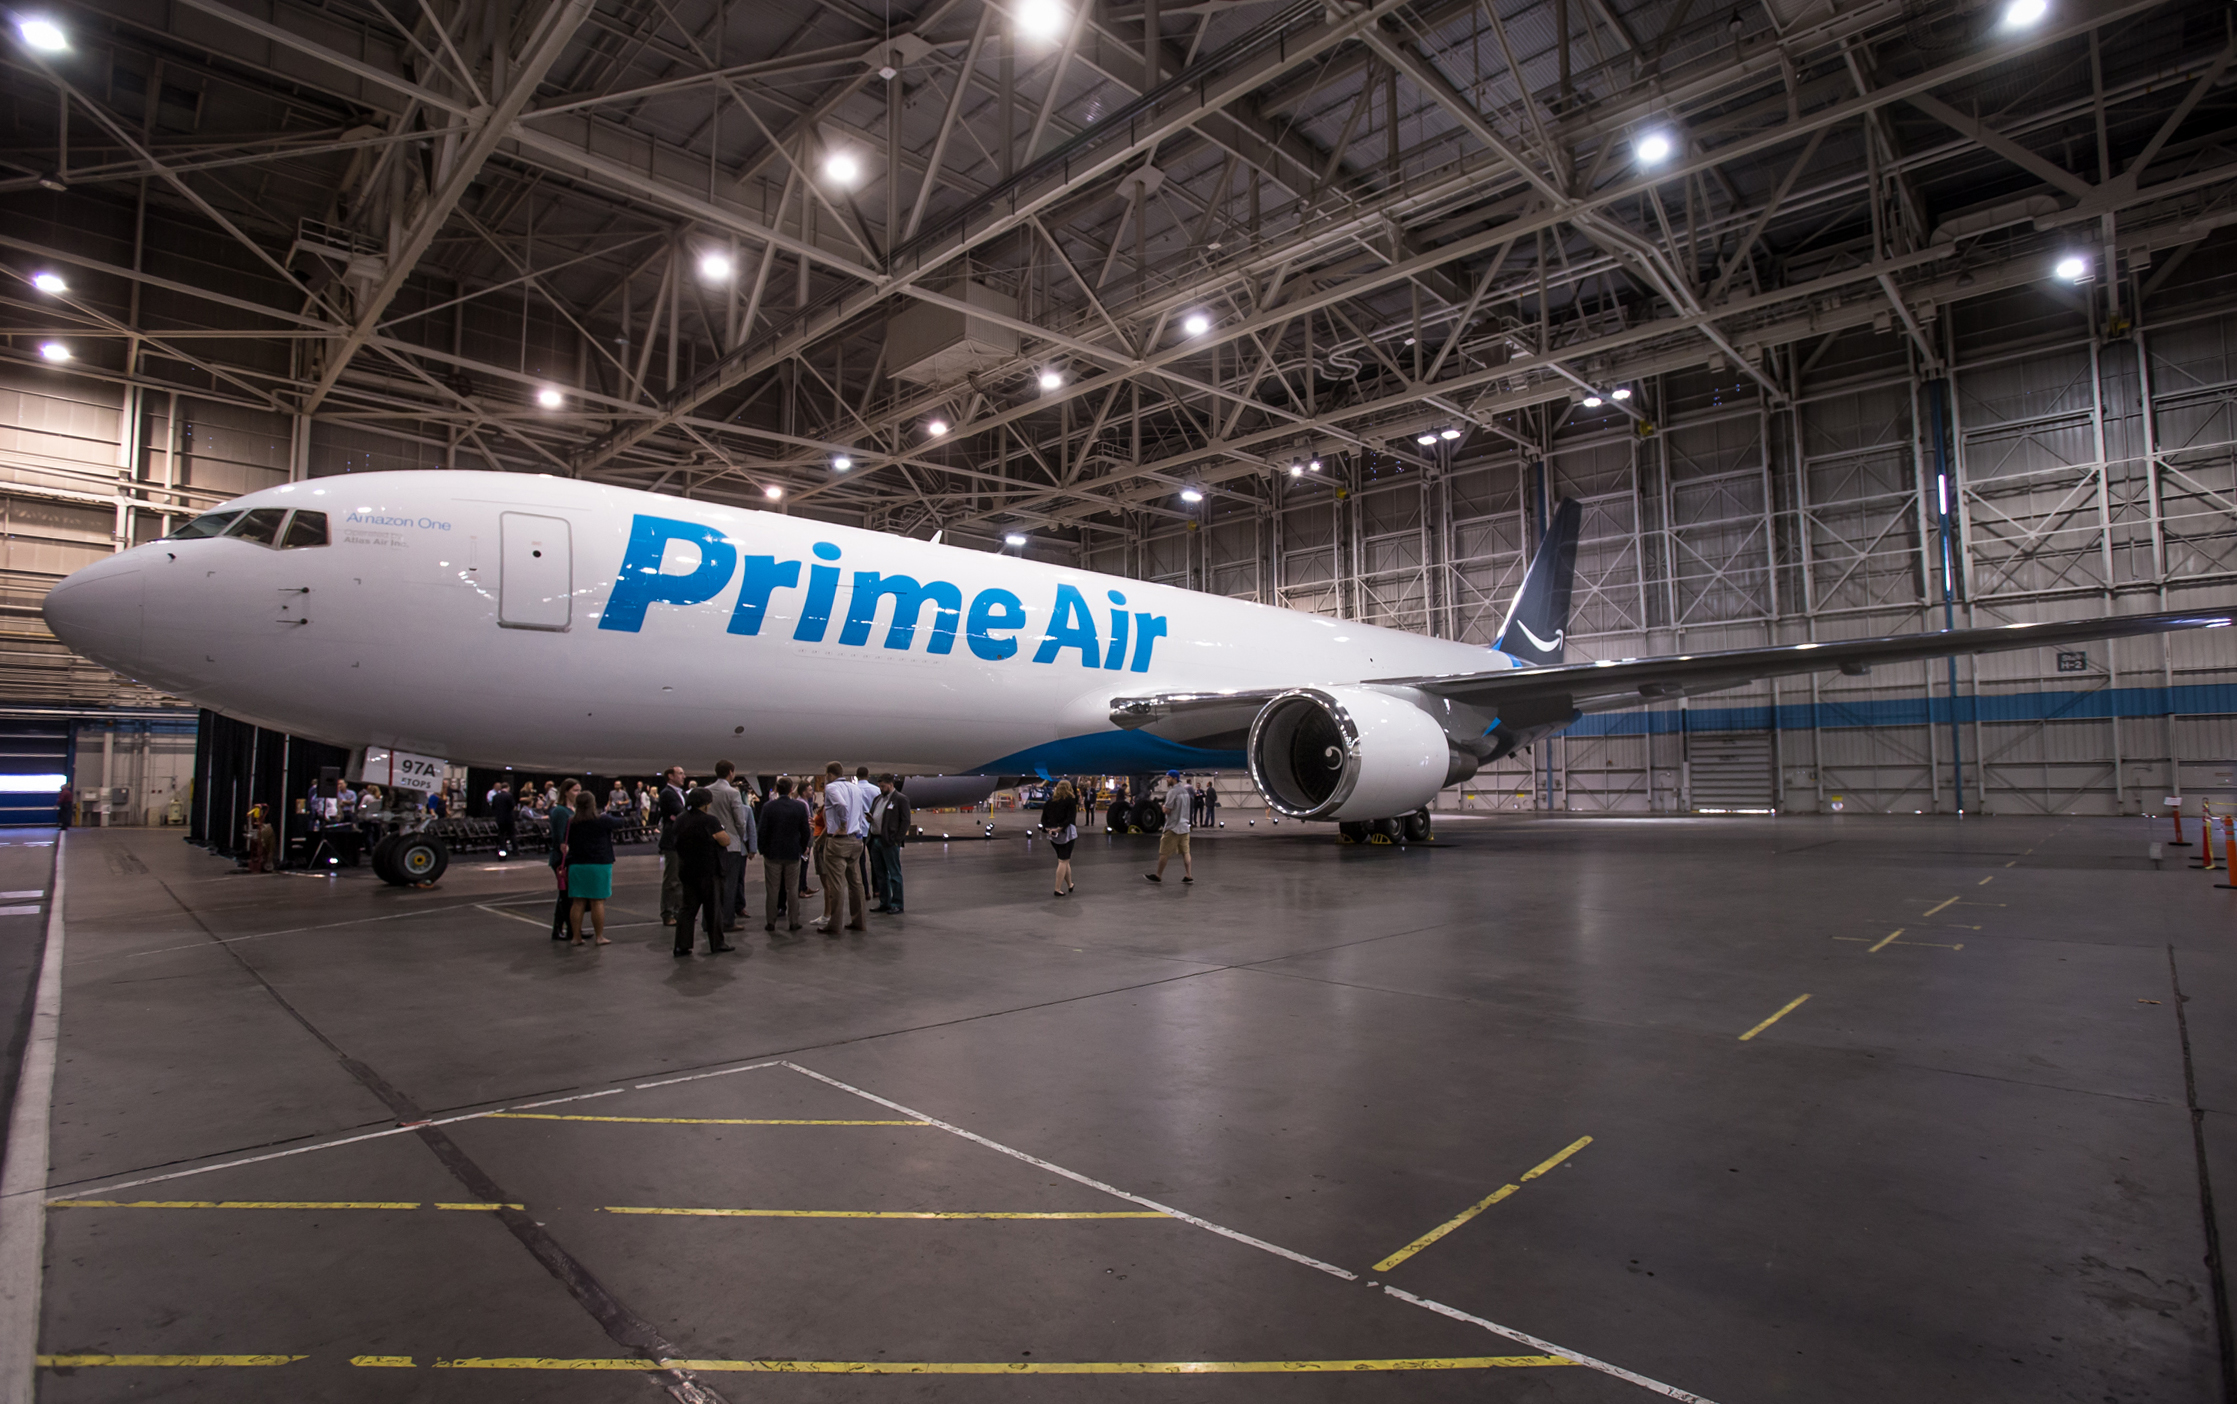 Amazon will use its Amazon Prime service as the basis for its air fleet branding.